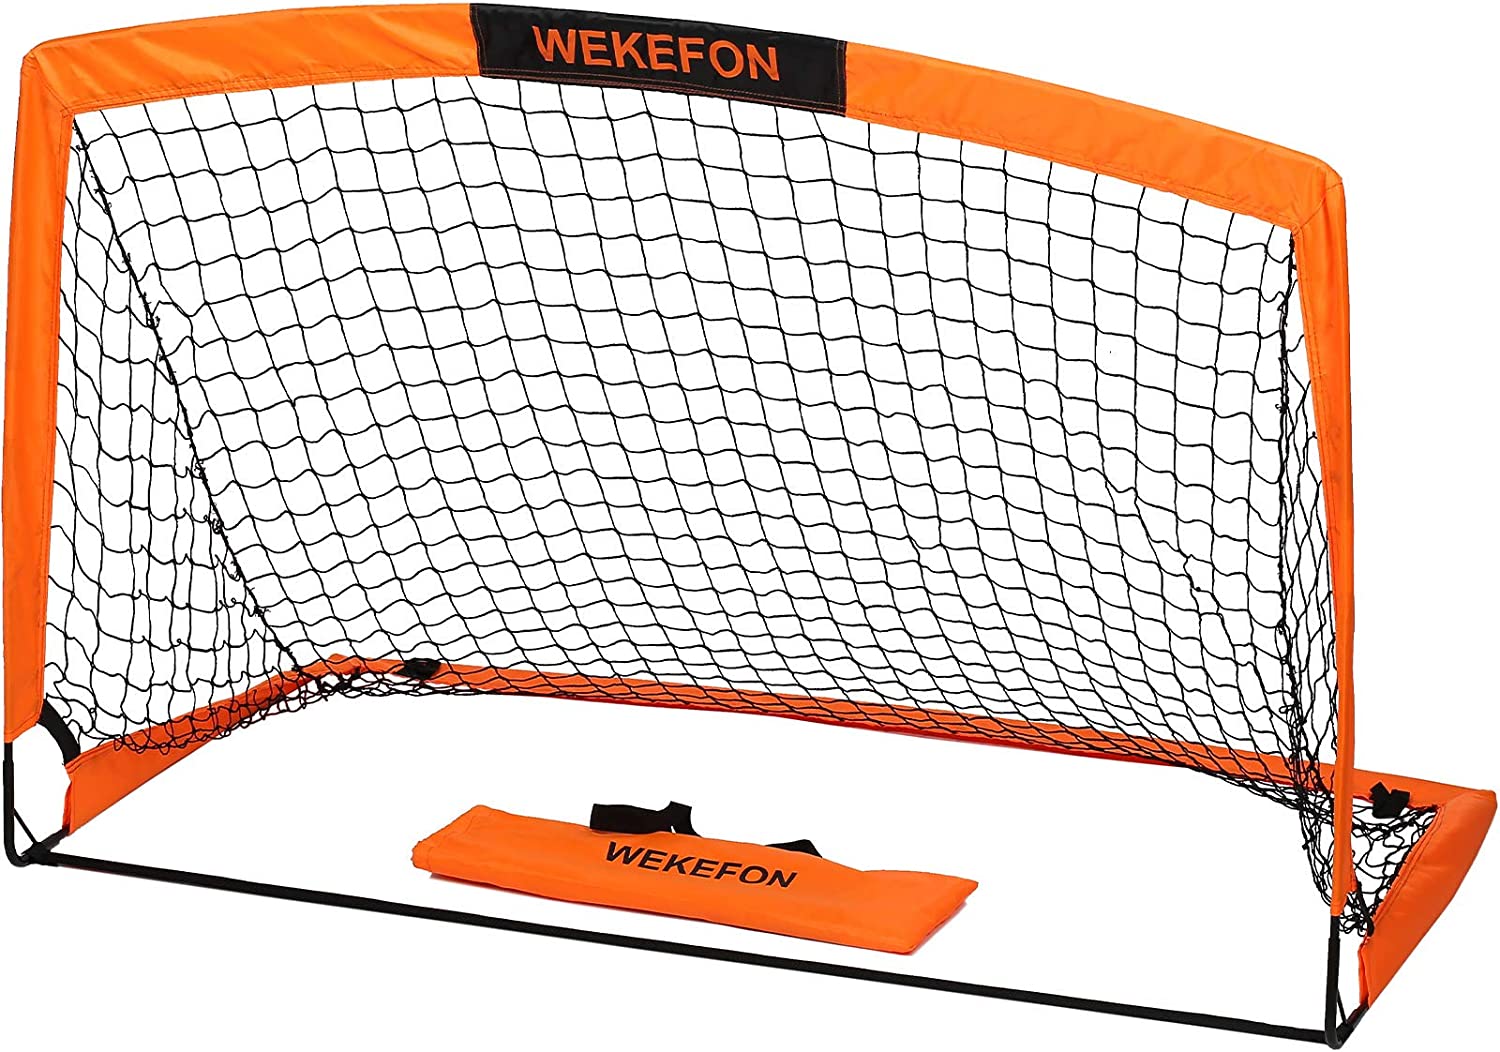 WEKEFON Impact-Resistant All-Weather Soccer Goal, 5×3.1-Foot